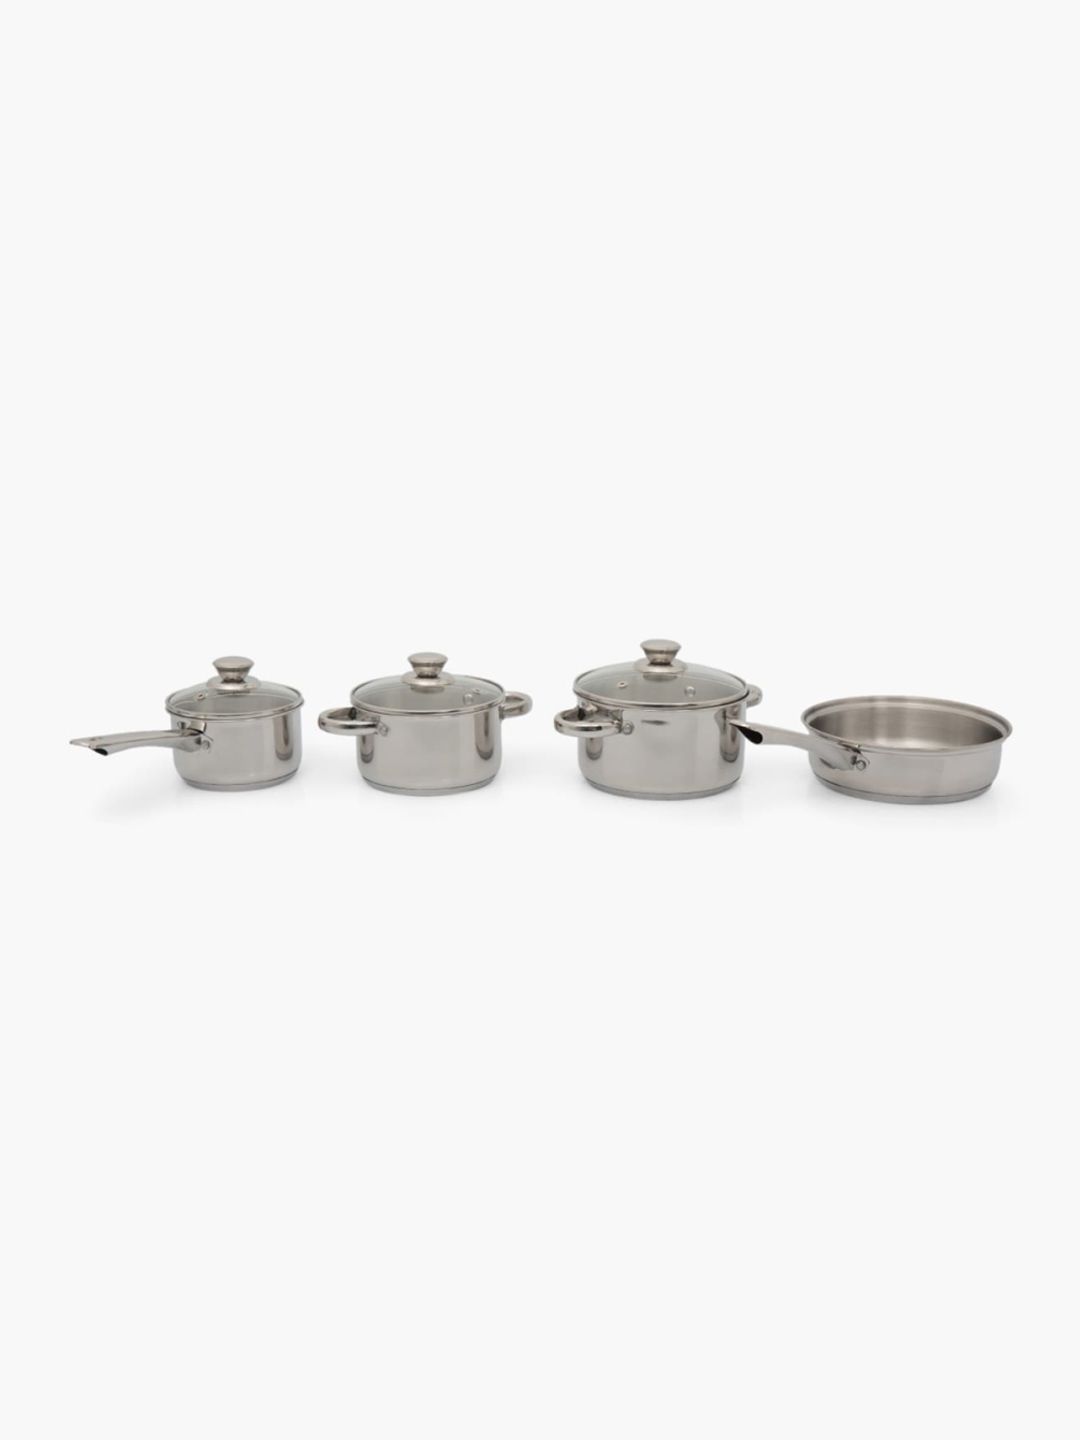 Homecentre Set Of 7 Silver-Toned Stainless Steel Cookwares Price in India